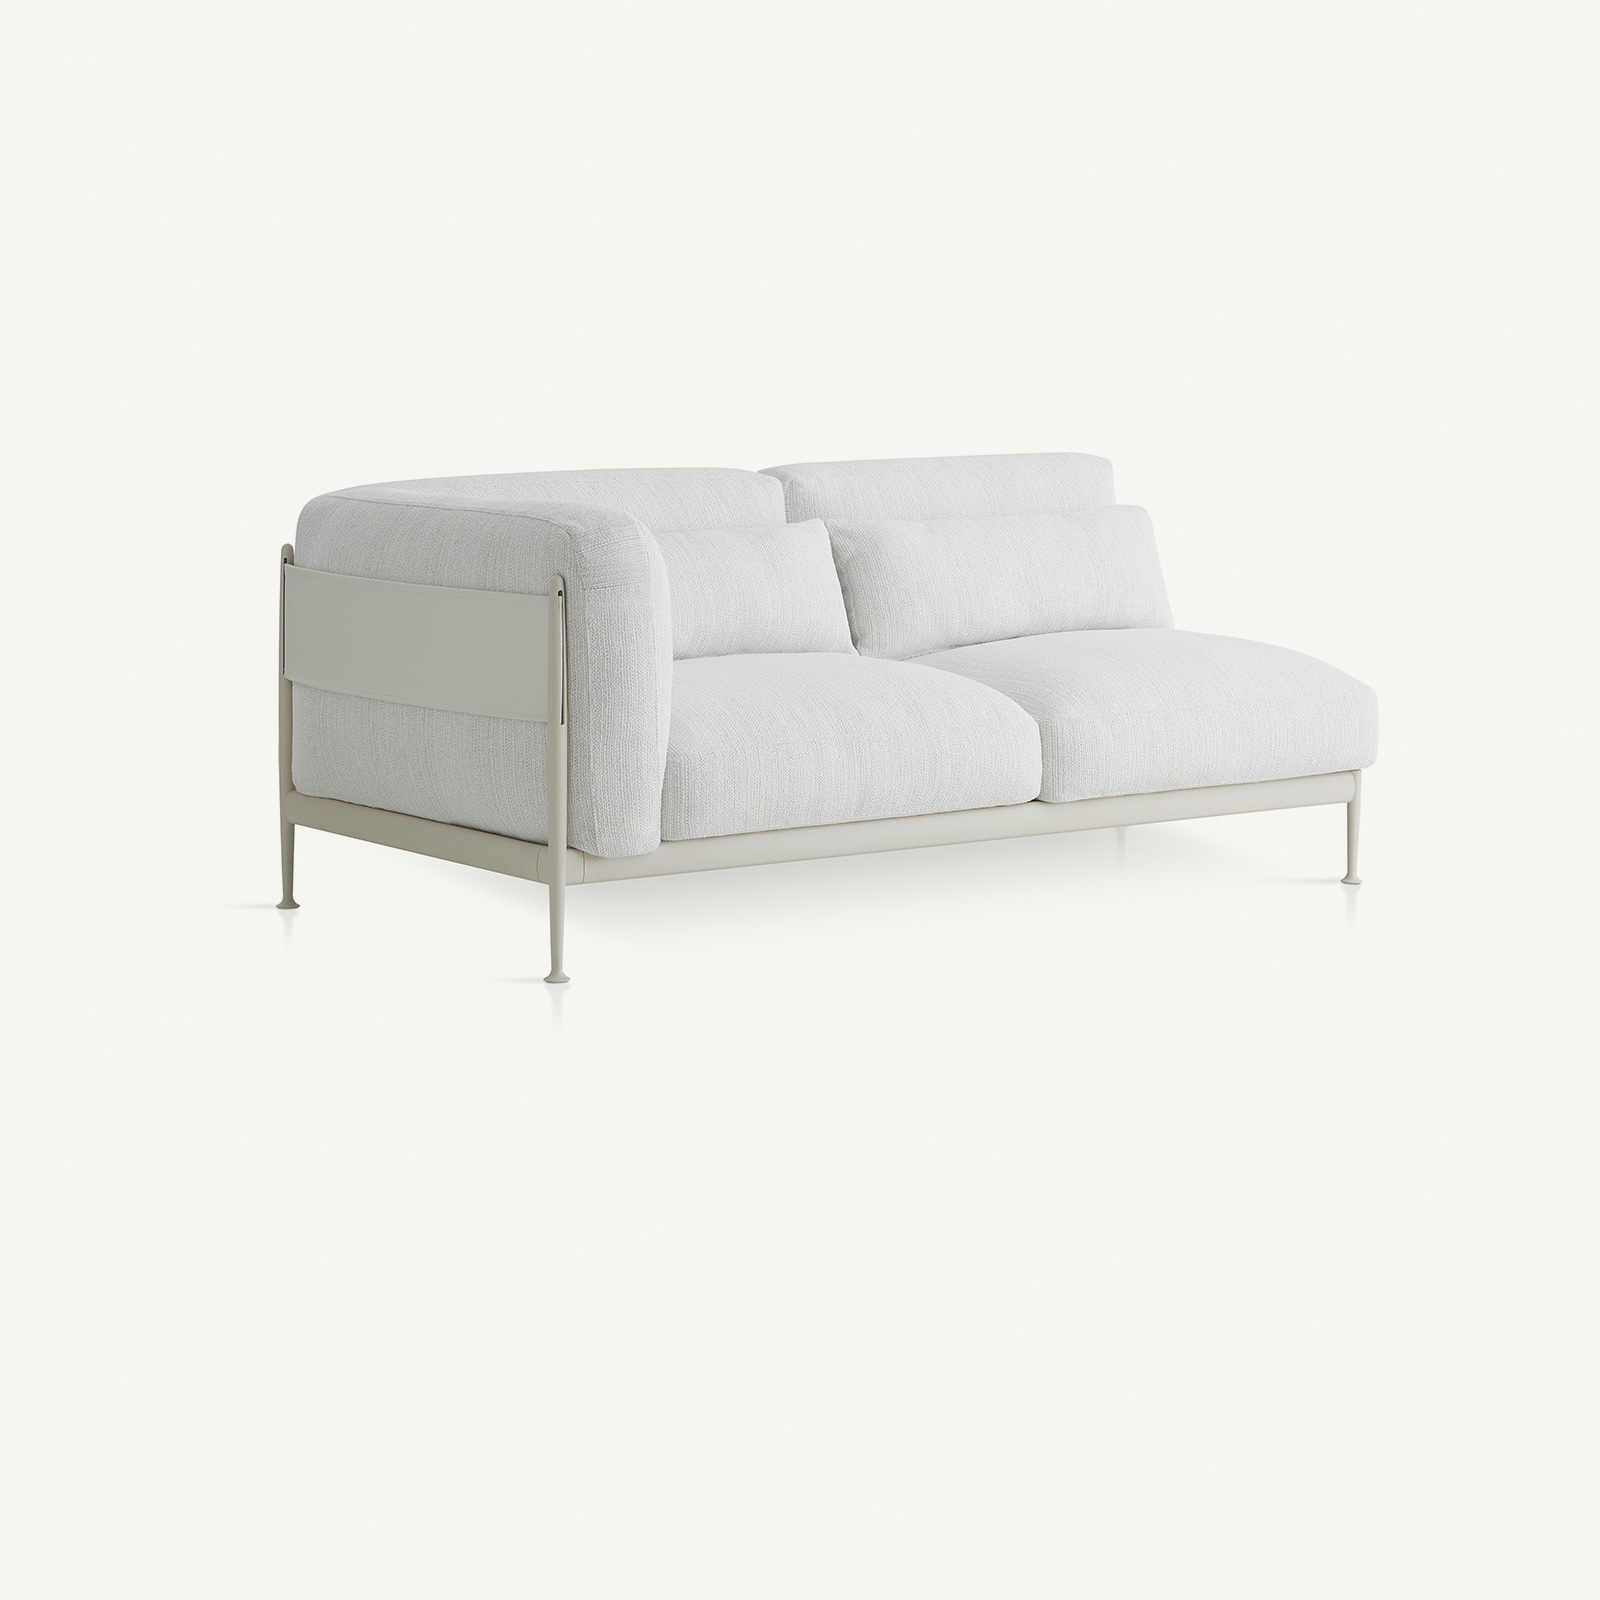 outdoor collection - sofas - obi left side module